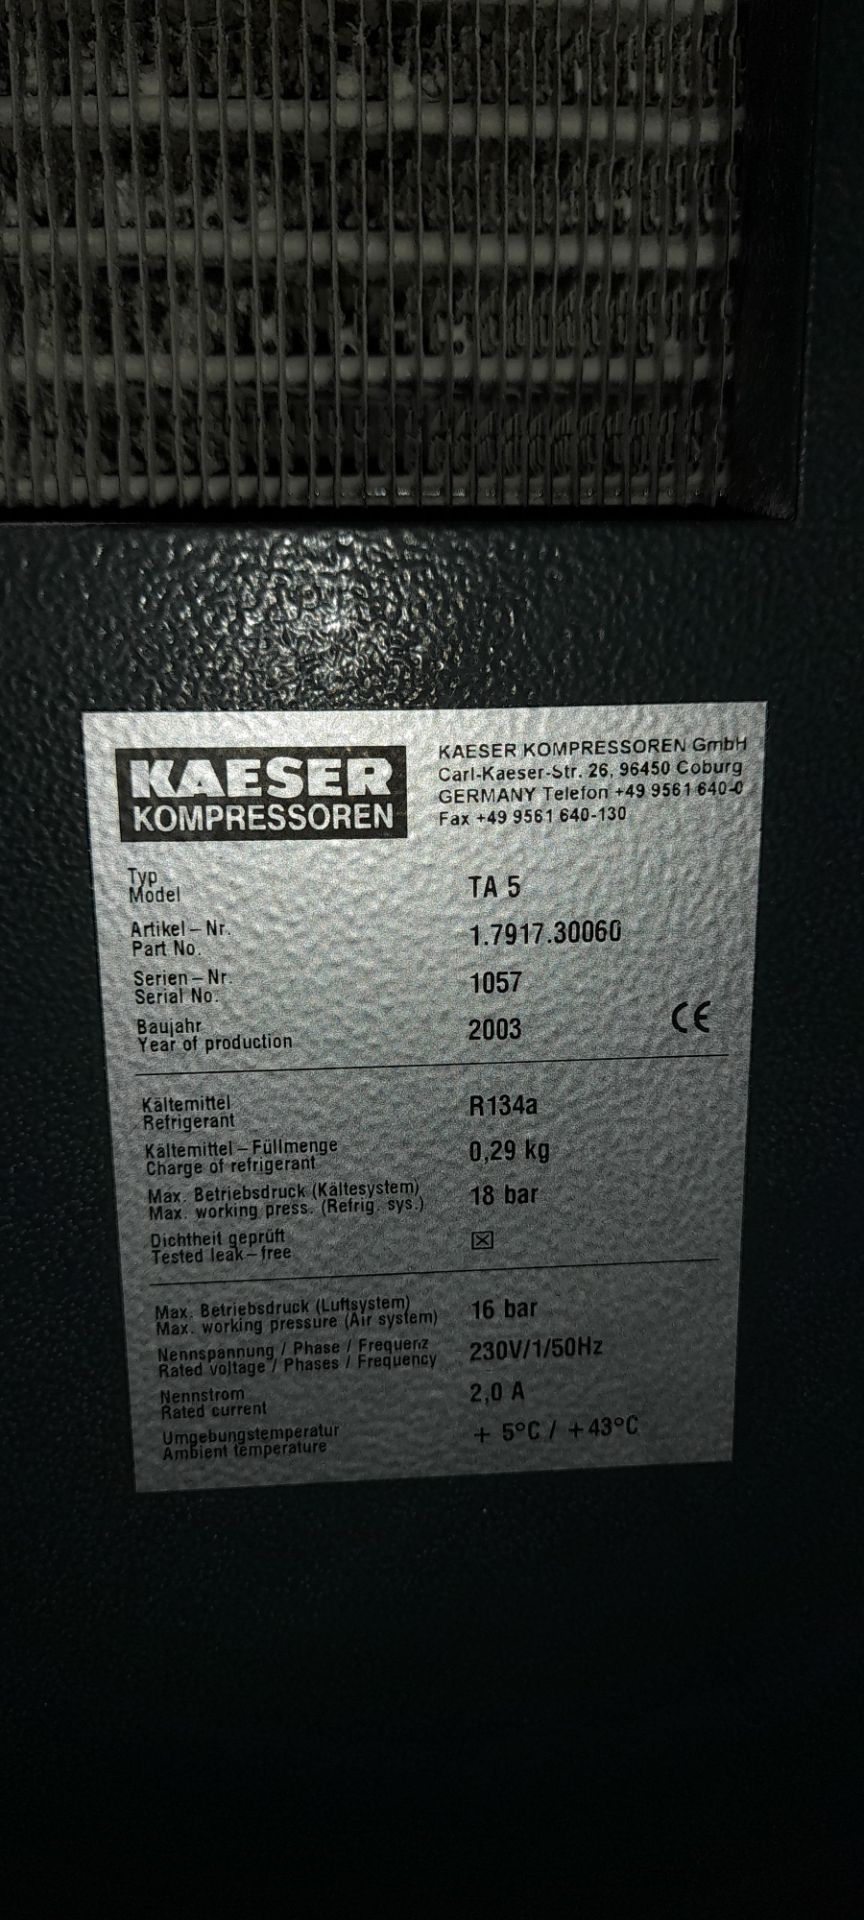 Kaeser HPC Plusair packaged type receiver mounted compressor Serial number 1187, Part No. 1.9694. - Image 5 of 5